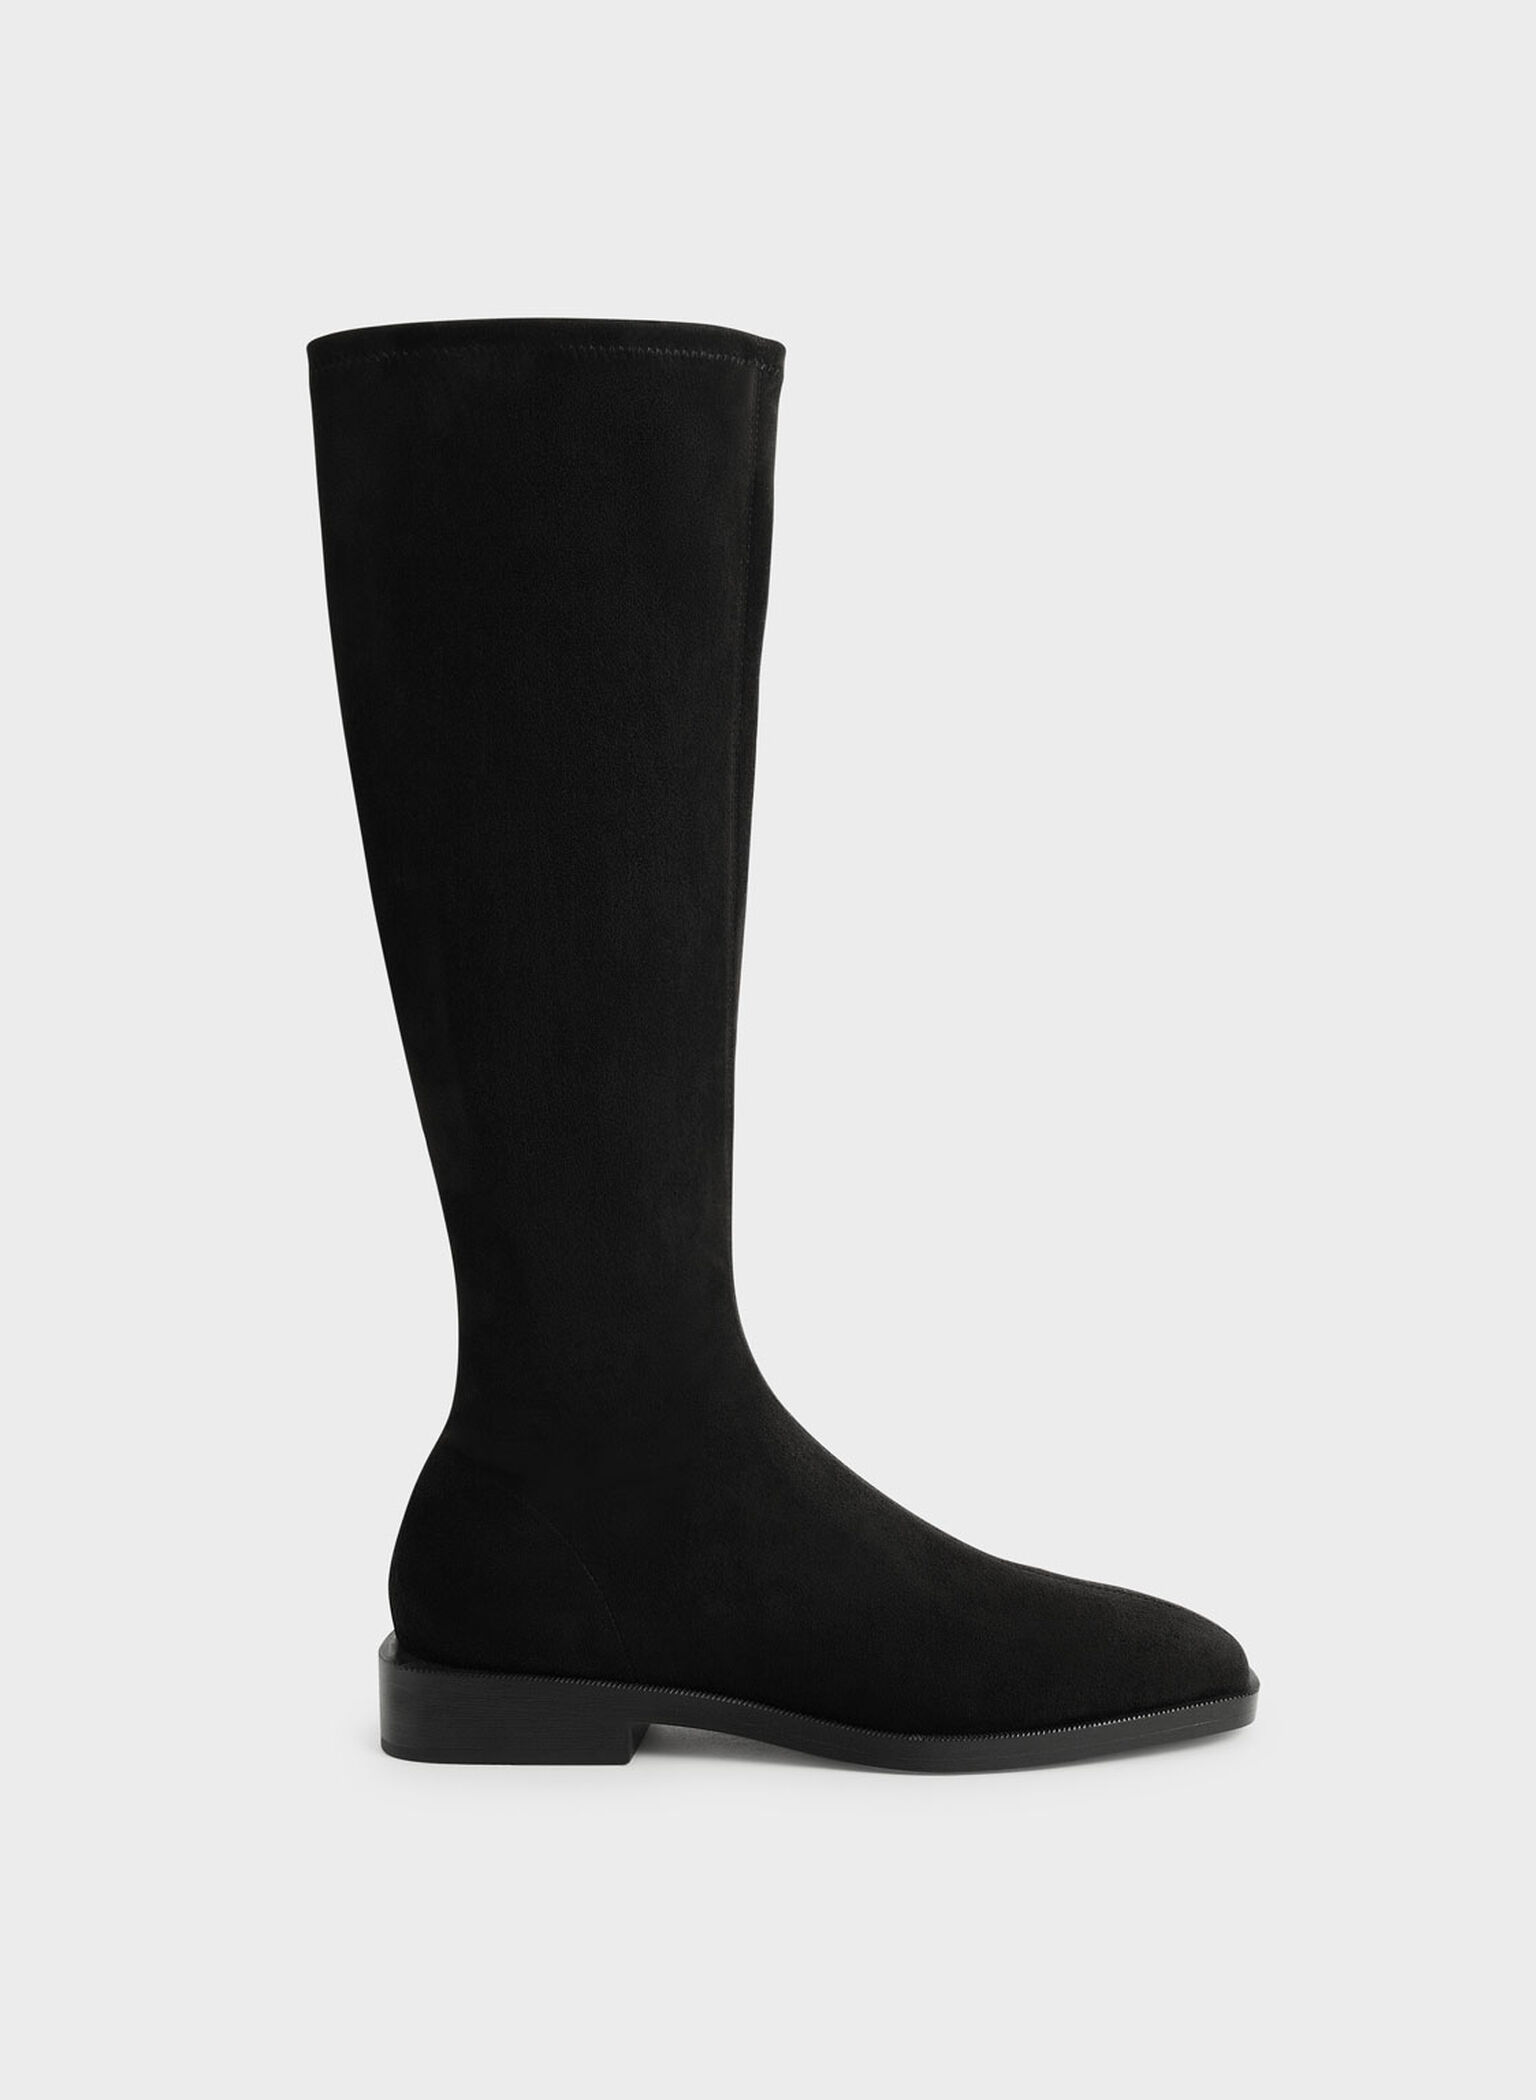 Black Textured Textured Knee High Flat Boots - CHARLES & KEITH US